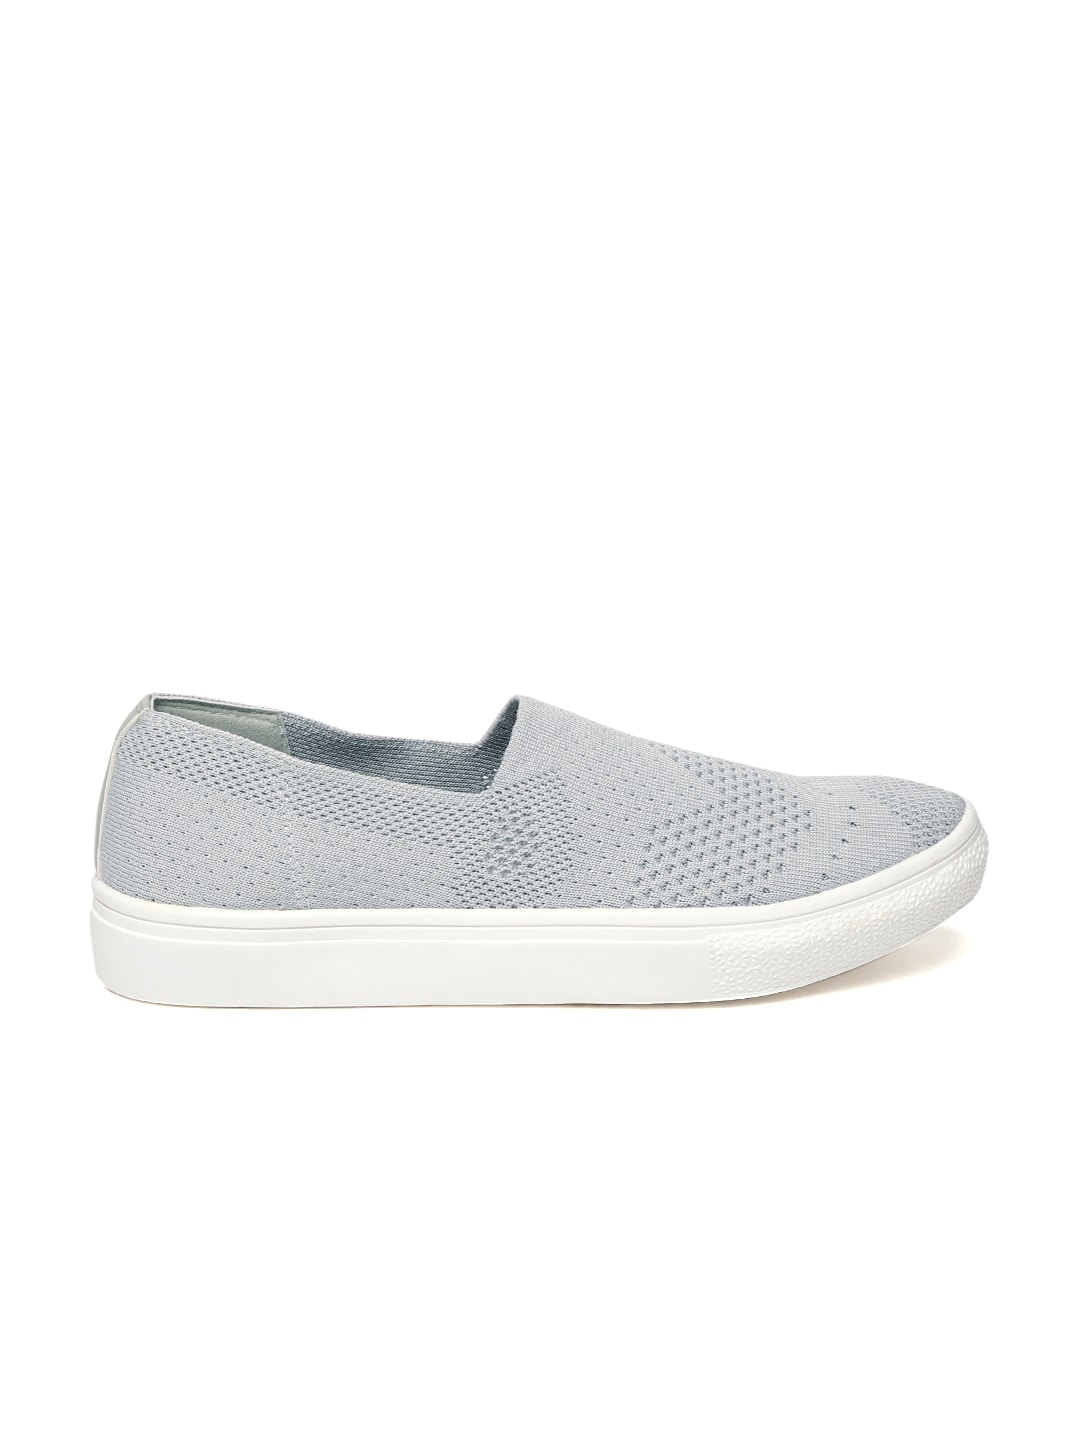 ether Women Grey Woven Design Slip-On Sneakers Price in India